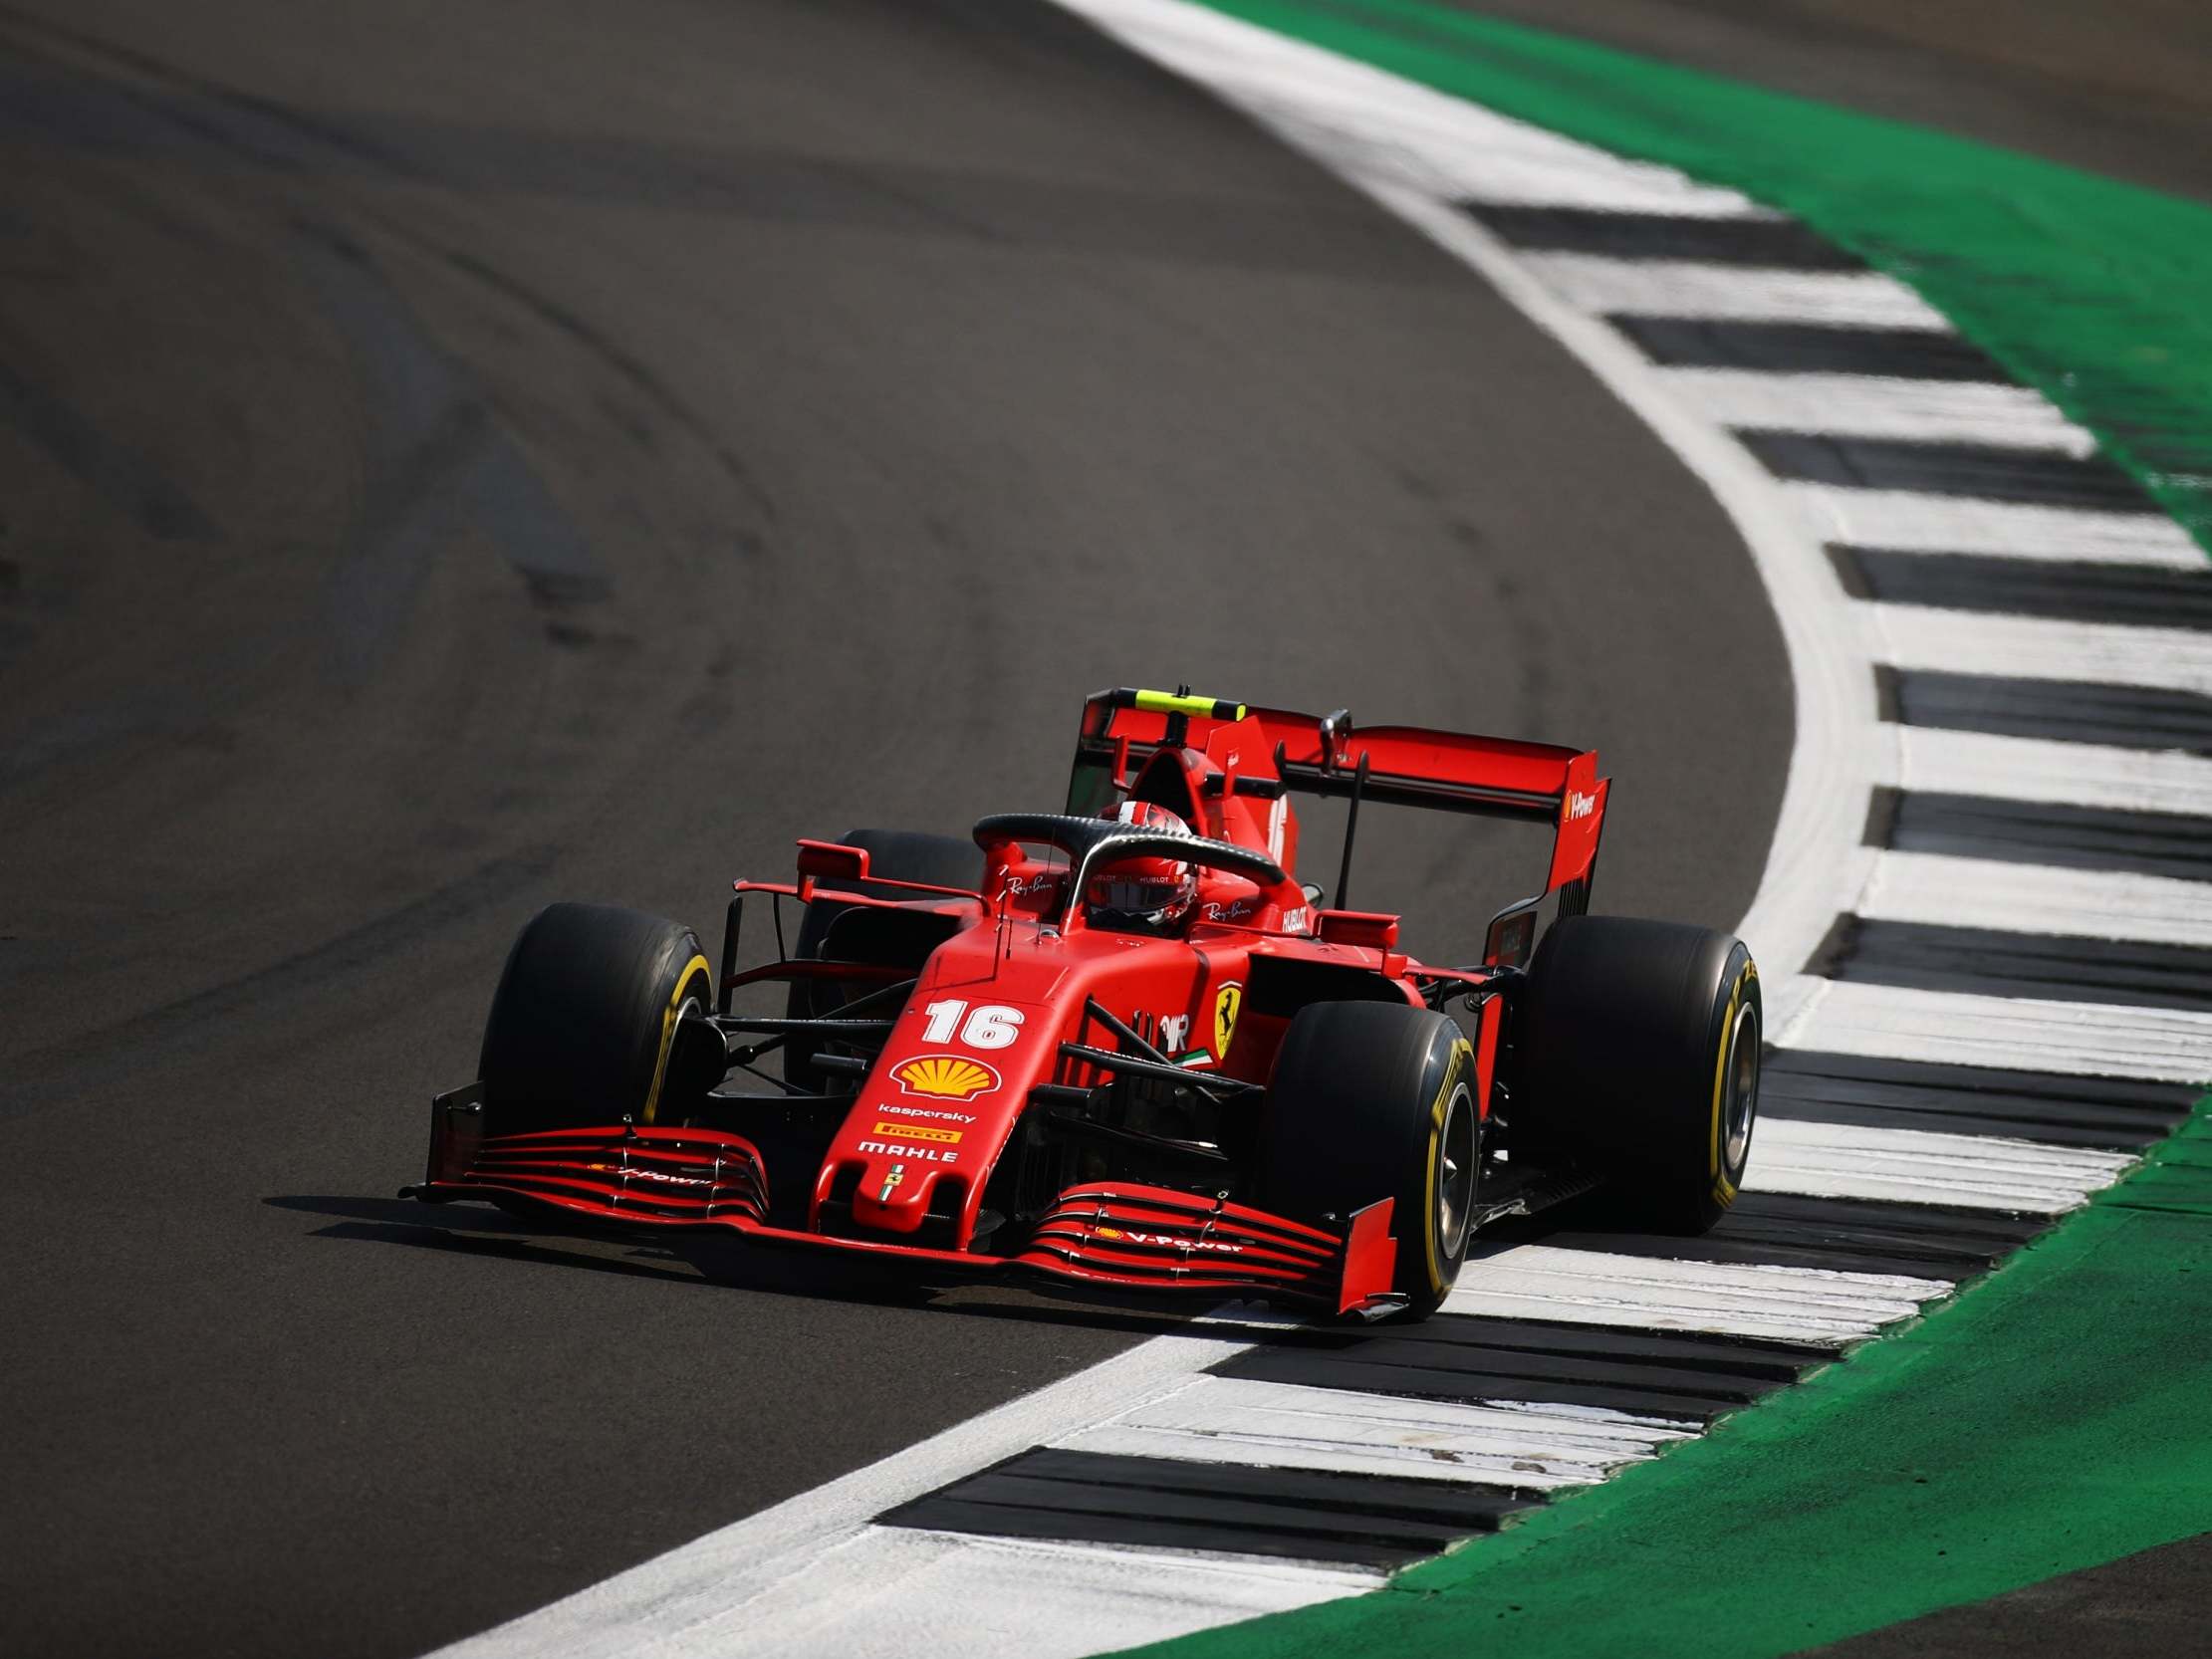 Charles Leclerc drove to an impressive fourth-place finish